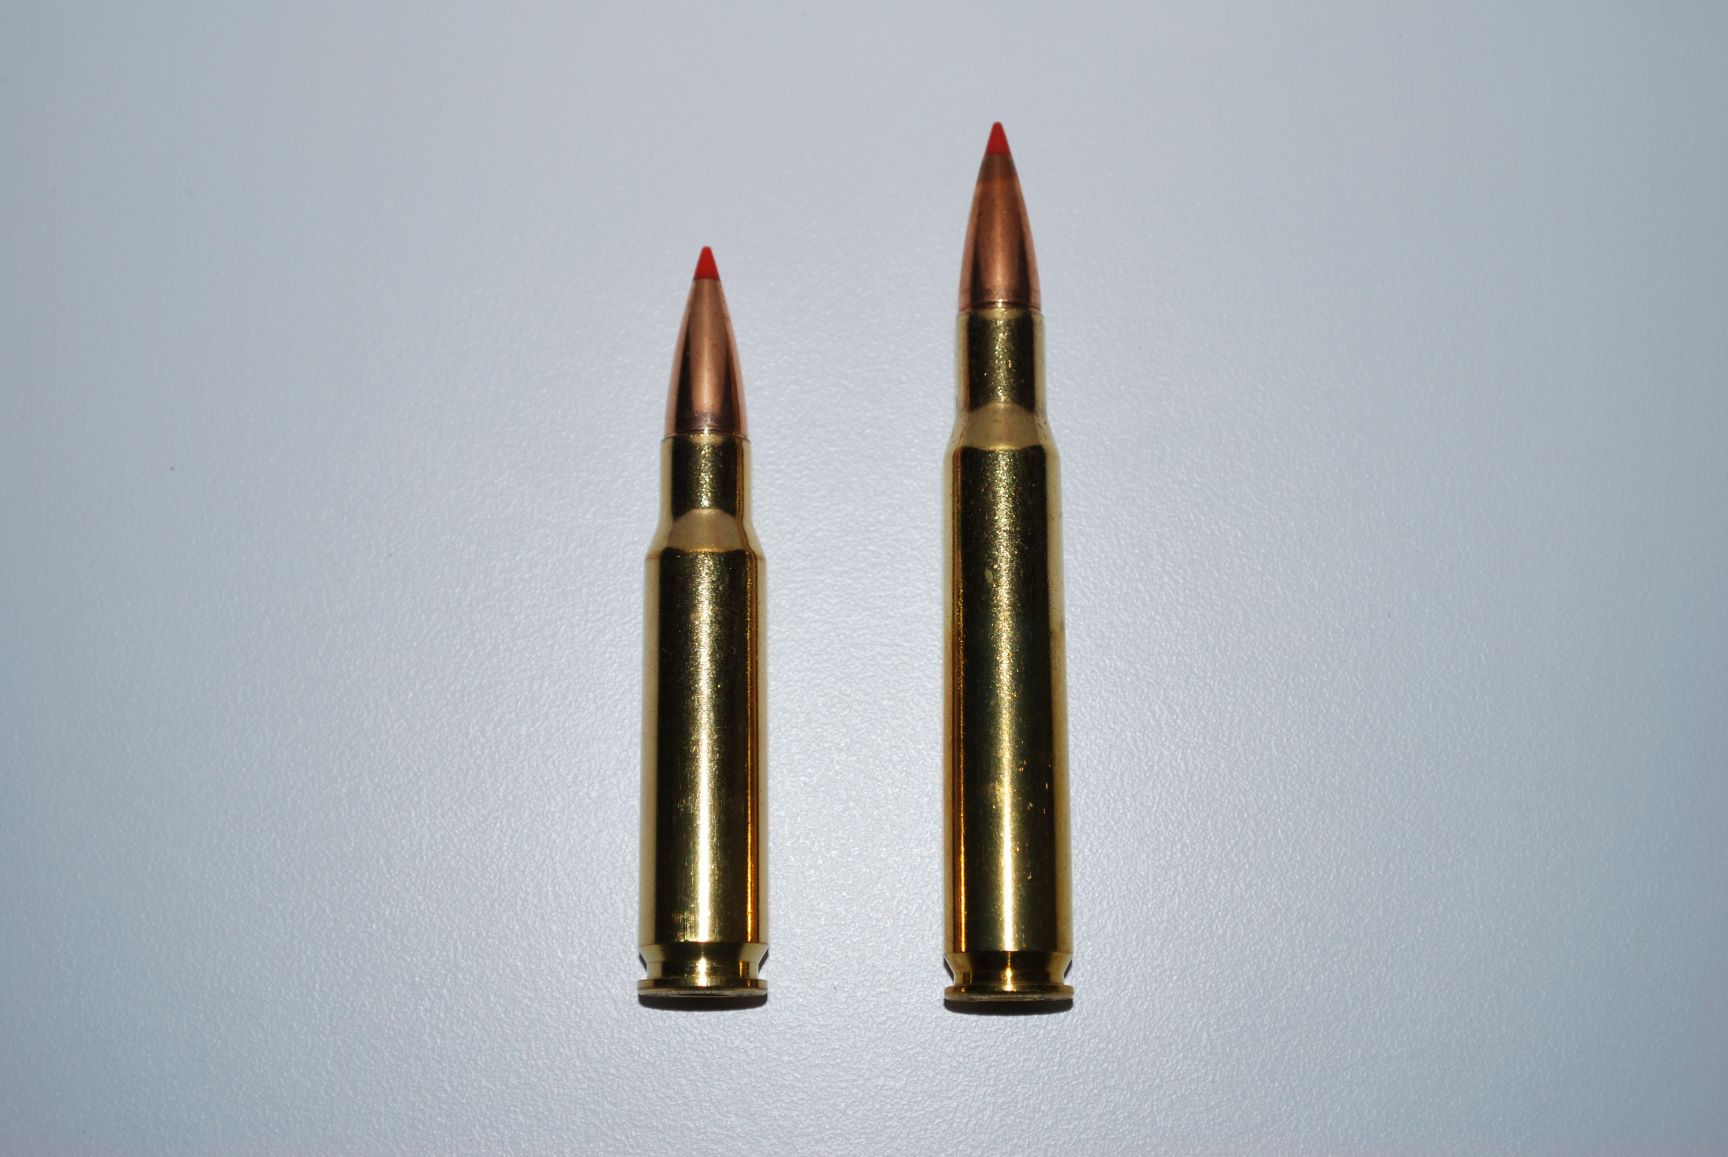 DSC_0292: Left, .308 Winchester; right, .30-06. The .308 (7.62x51 NATO) was introduced in 1952 by shortening the .30-06 case. The result is a slightly less powerful cartridge that fits in short actions, is more efficient, and tends to be extremely accurate